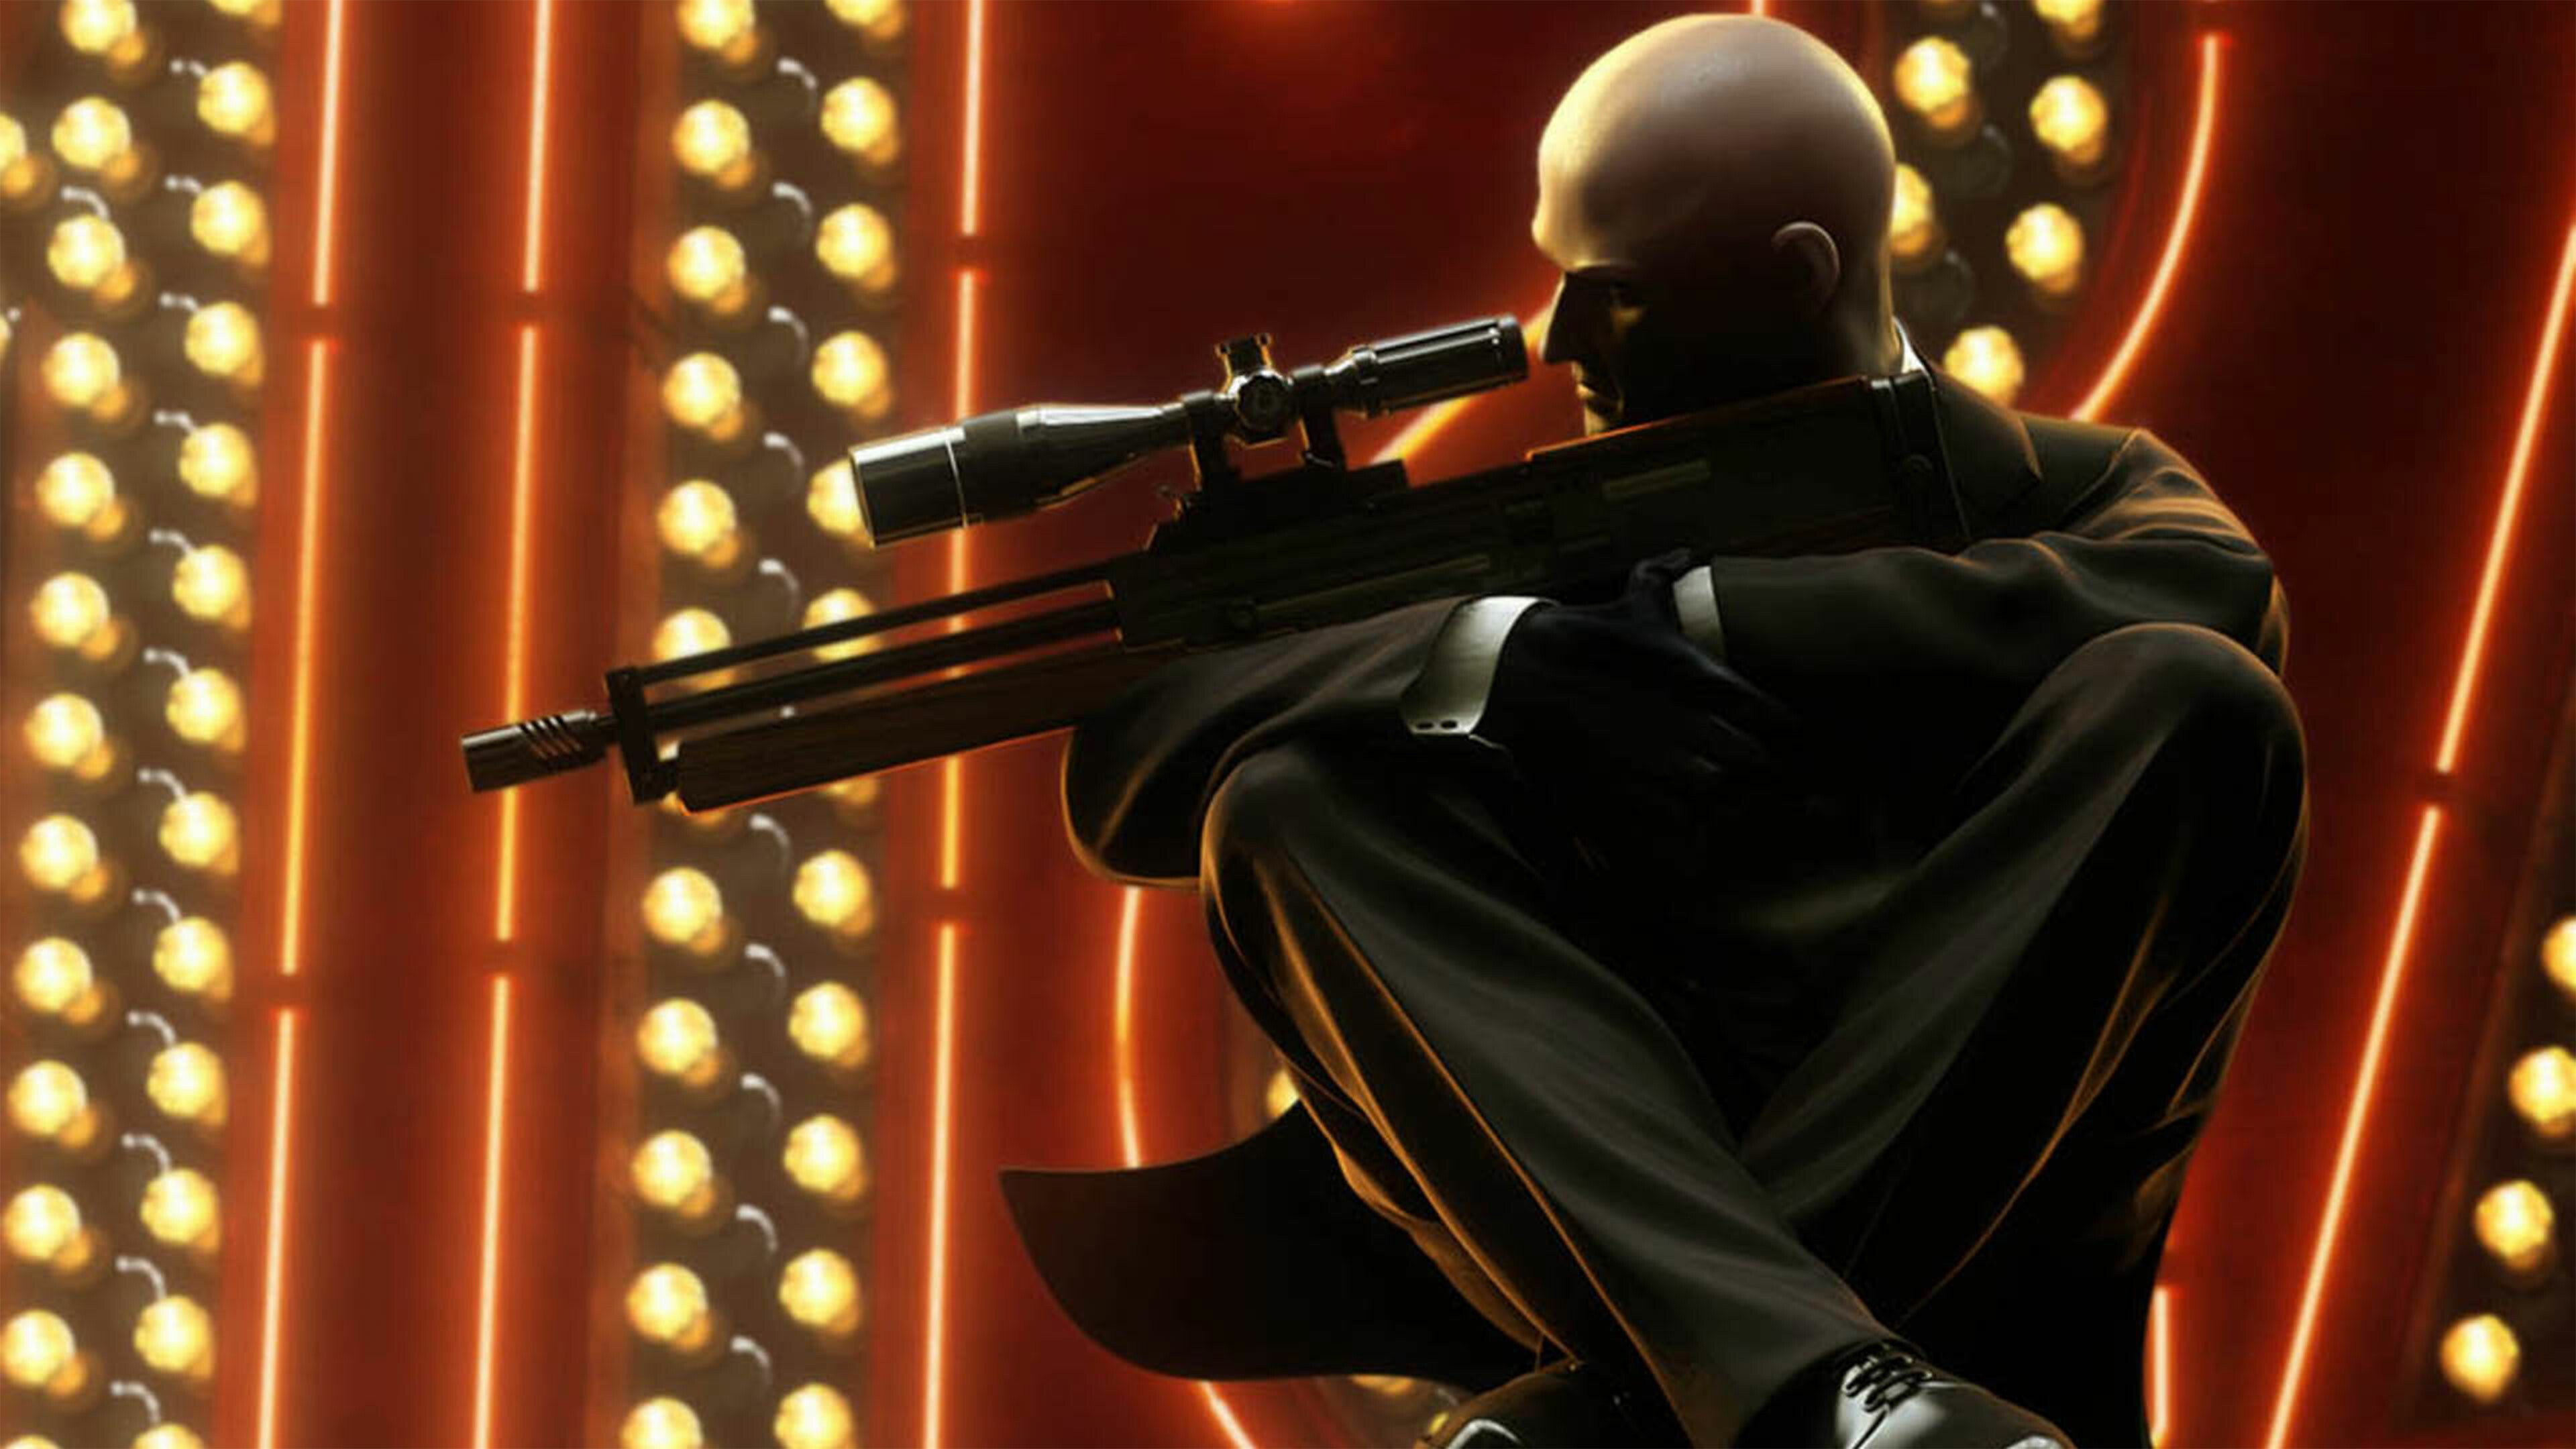 Hitman (Game): The series' main protagonist and playable character, Agent 47. 3840x2160 4K Background.